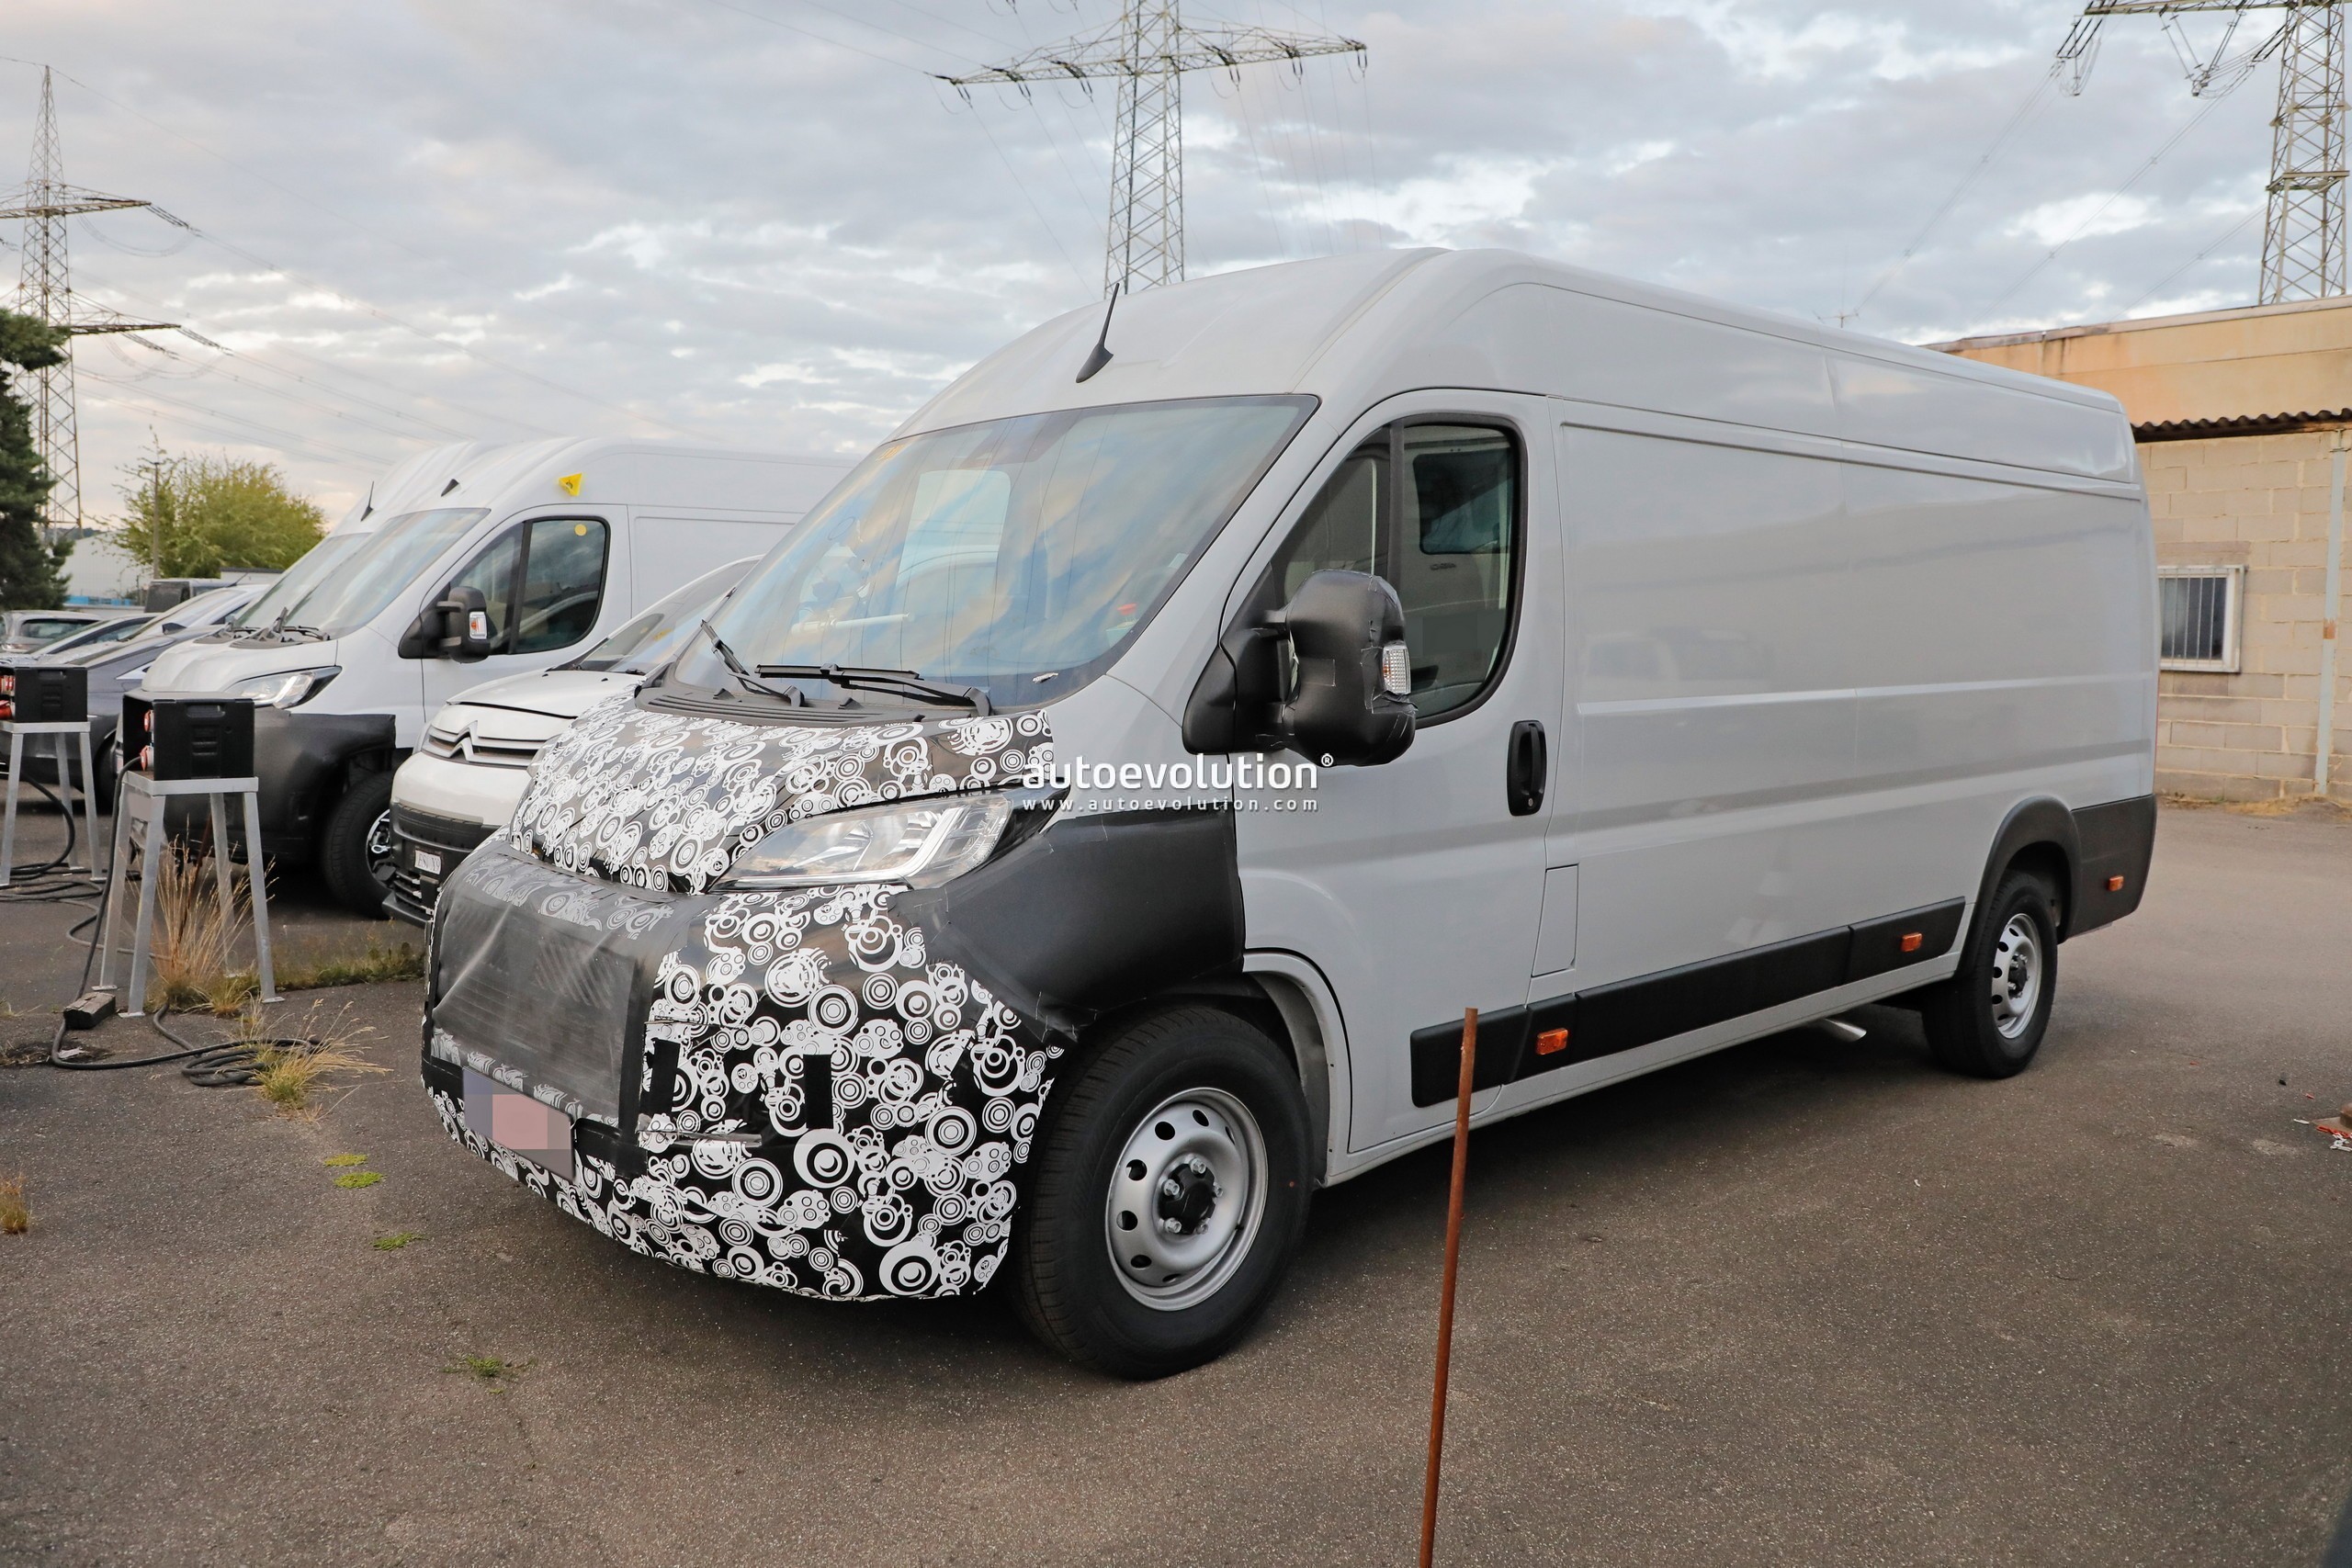 https://s1.cdn.autoevolution.com/images/news/gallery/2025-fiat-ducato-is-a-few-pricey-conversions-away-from-becoming-a-great-camper-van_13.jpg